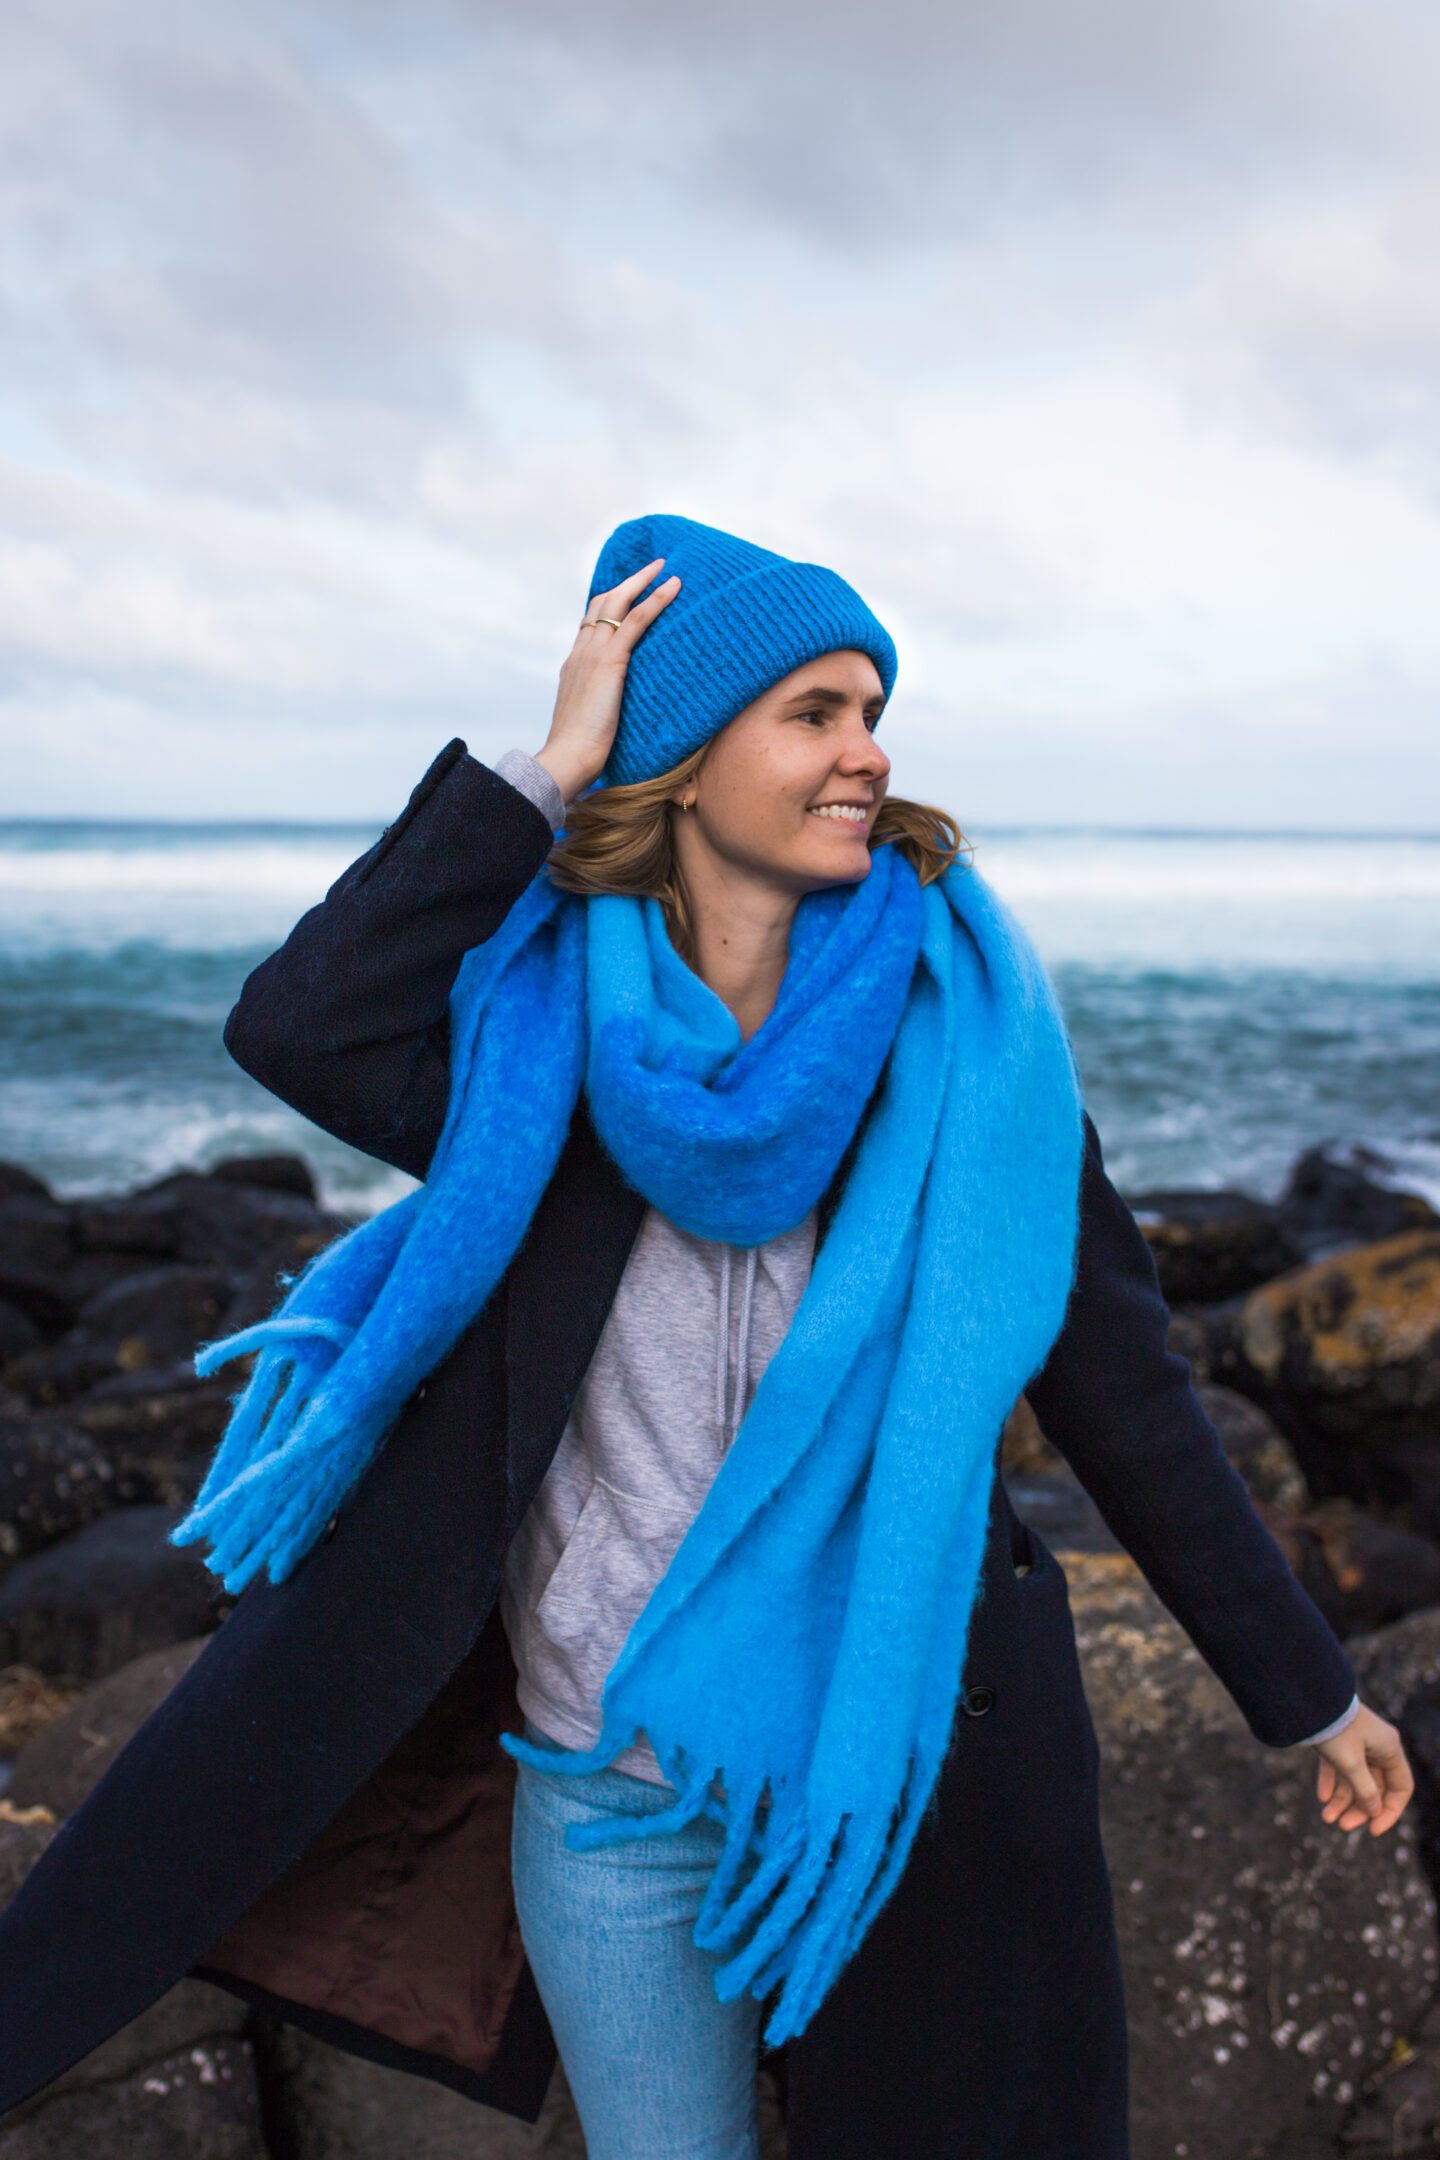 Portrait shot of a girl in a bright blue scarf and beanie on the beach